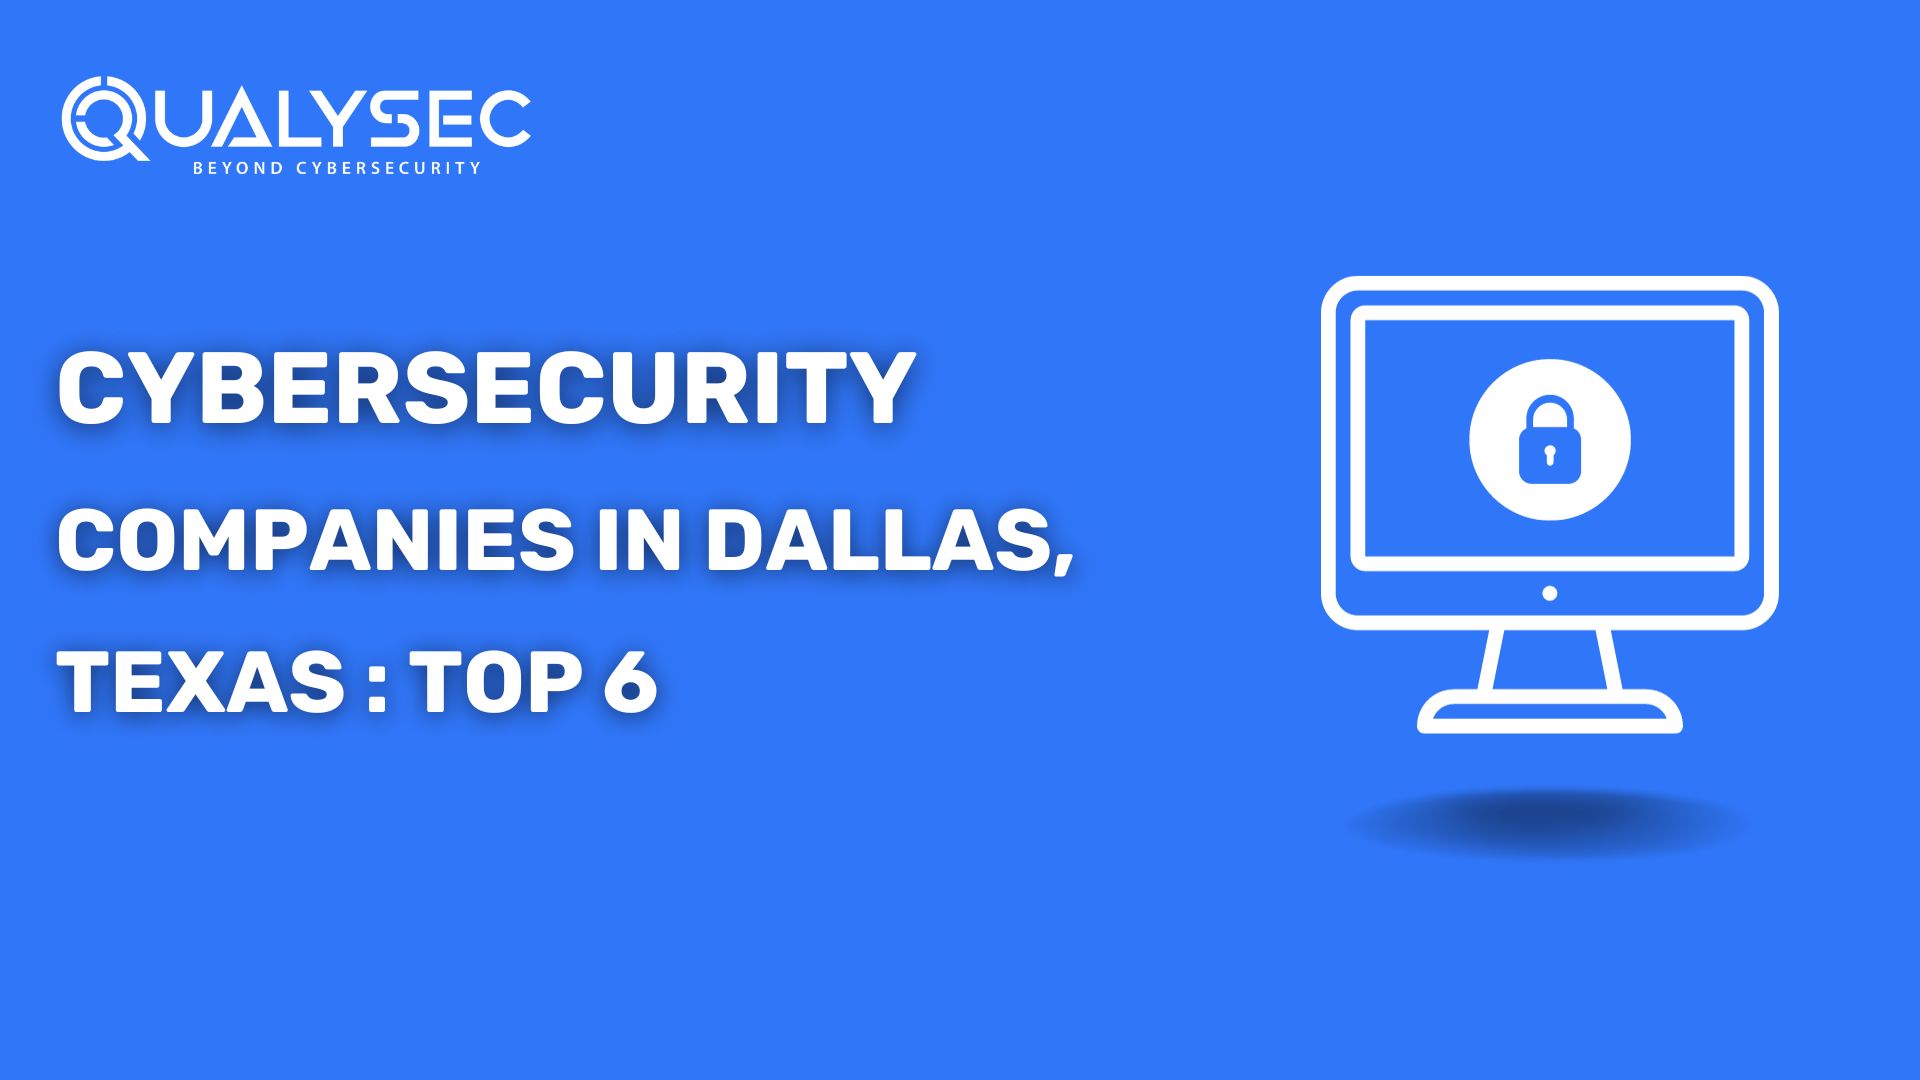 Here are the Top Cybersecurity Companies in Dallas, Texas